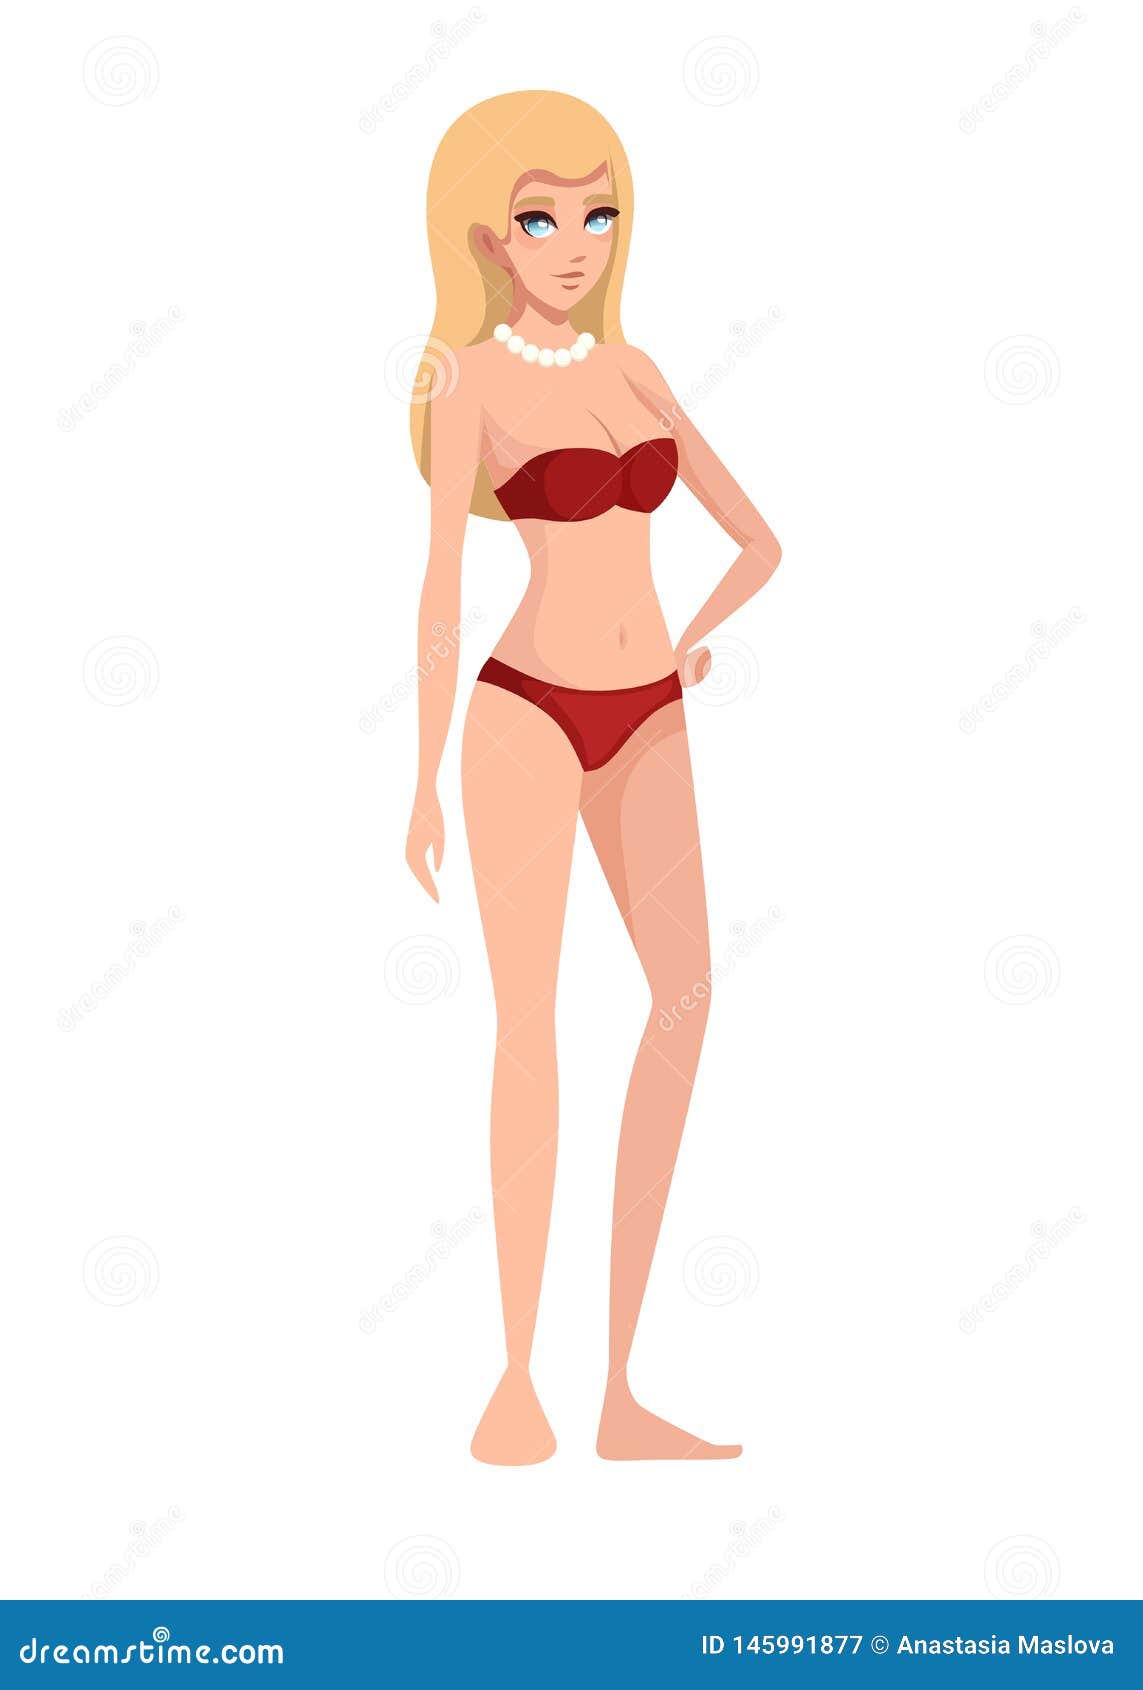 Beautiful Women Wearing Red Modern Style Swimsuit and White Beads Necklace. Cartoon  Character Design Stock Illustration - Illustration of clothing, clothes:  145991877